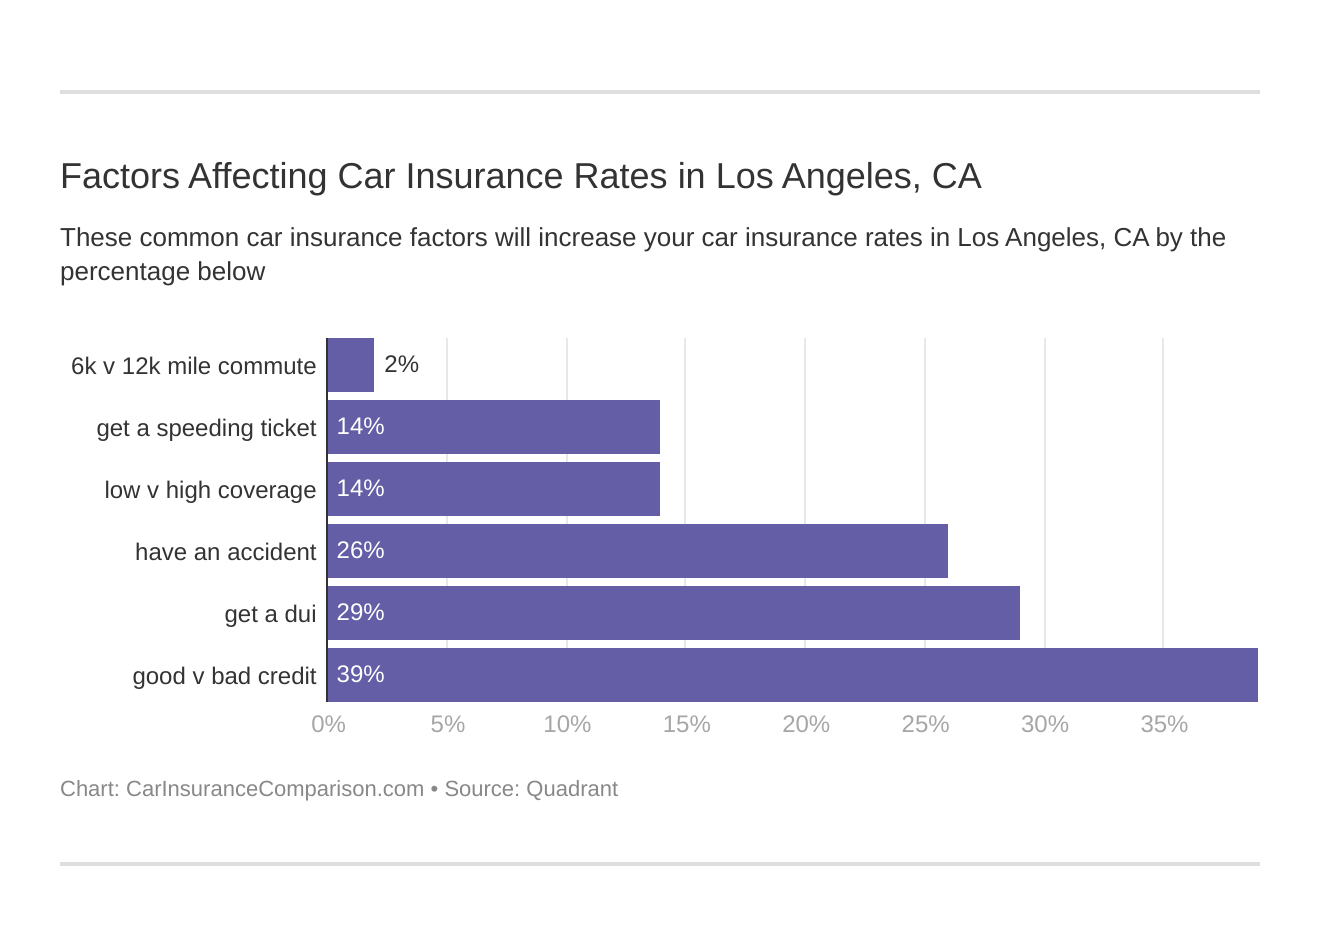 Factors Affecting Car Insurance Rates in Los Angeles, CA